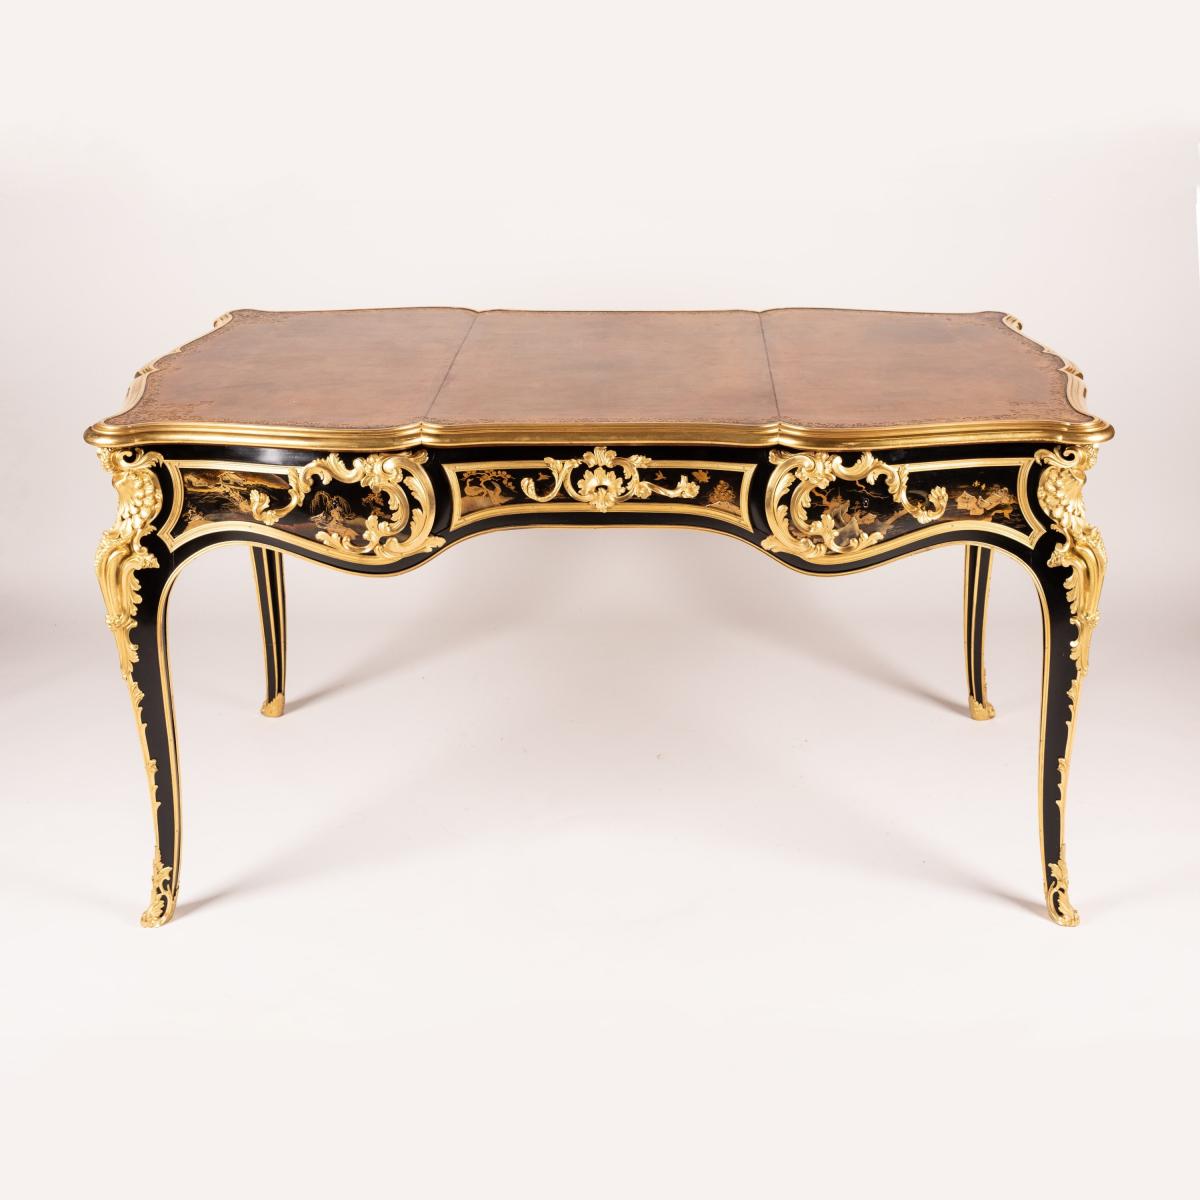 A Lacquer-Mounted Bureau Plat In the Louis XV Style